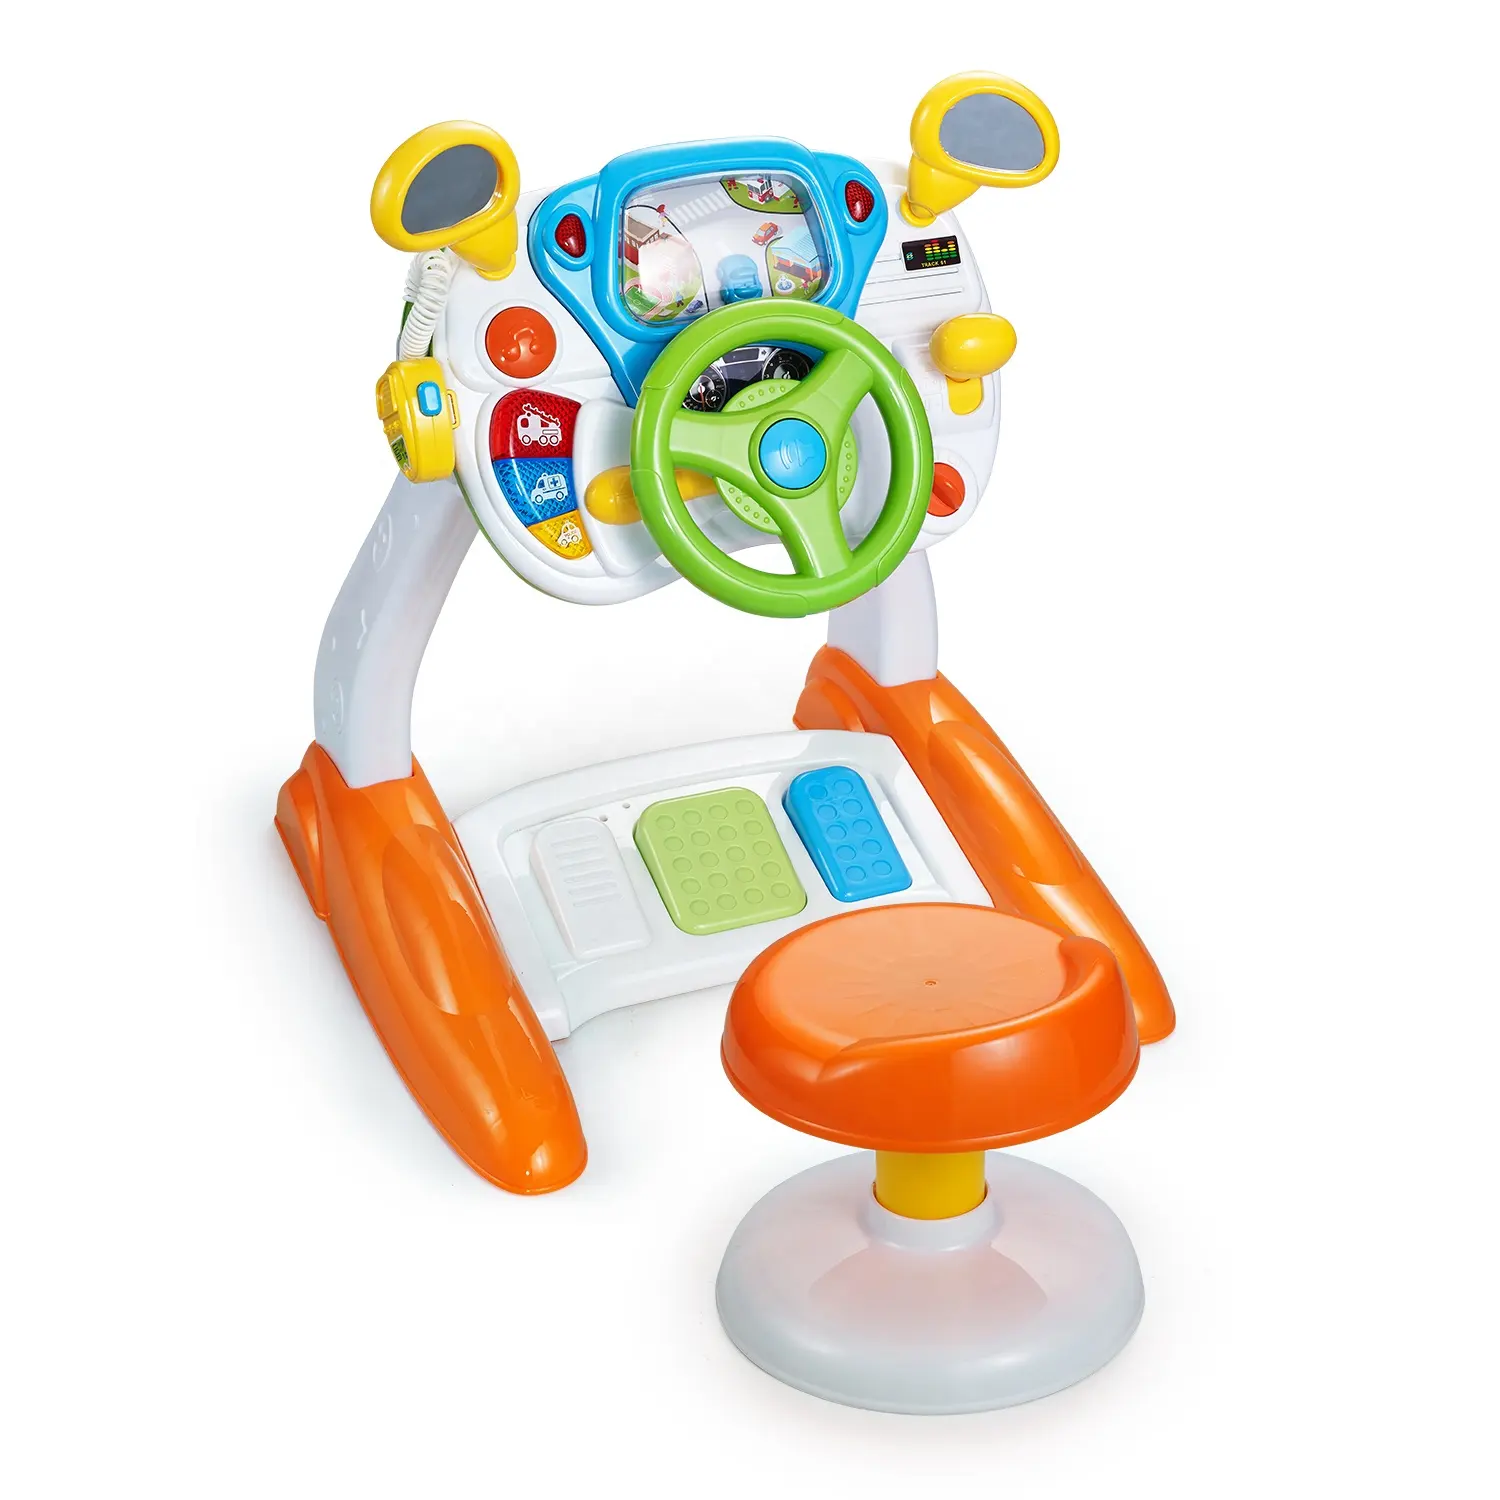 Hot Sale Interactive Simulation Driver Steering Wheel Toy with lights and sounds for Kids